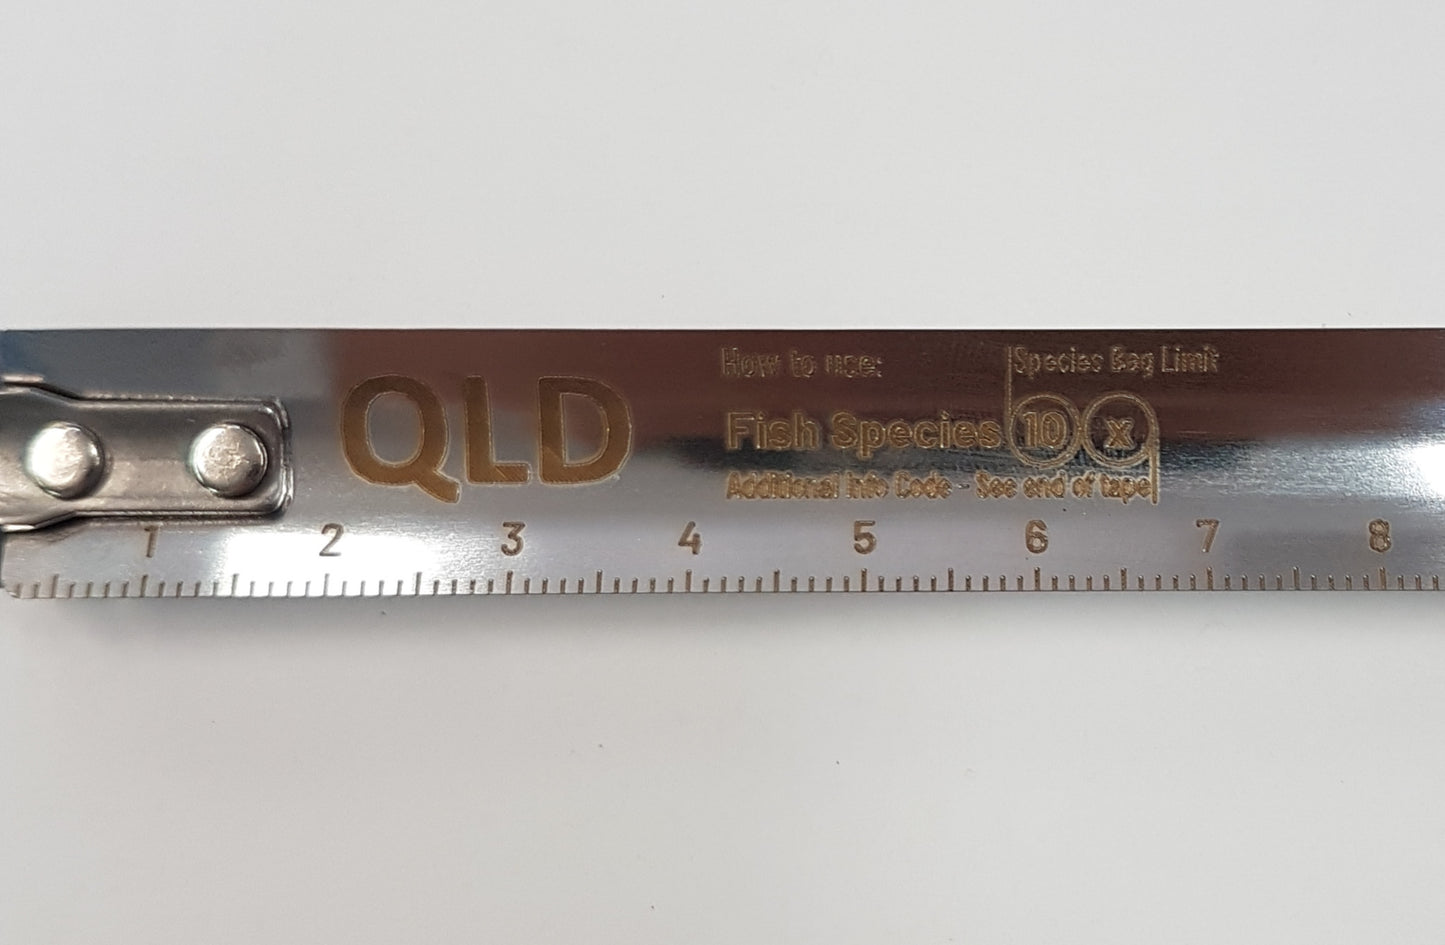 Fish Measure - Qld Stainless Steel Tape Measure